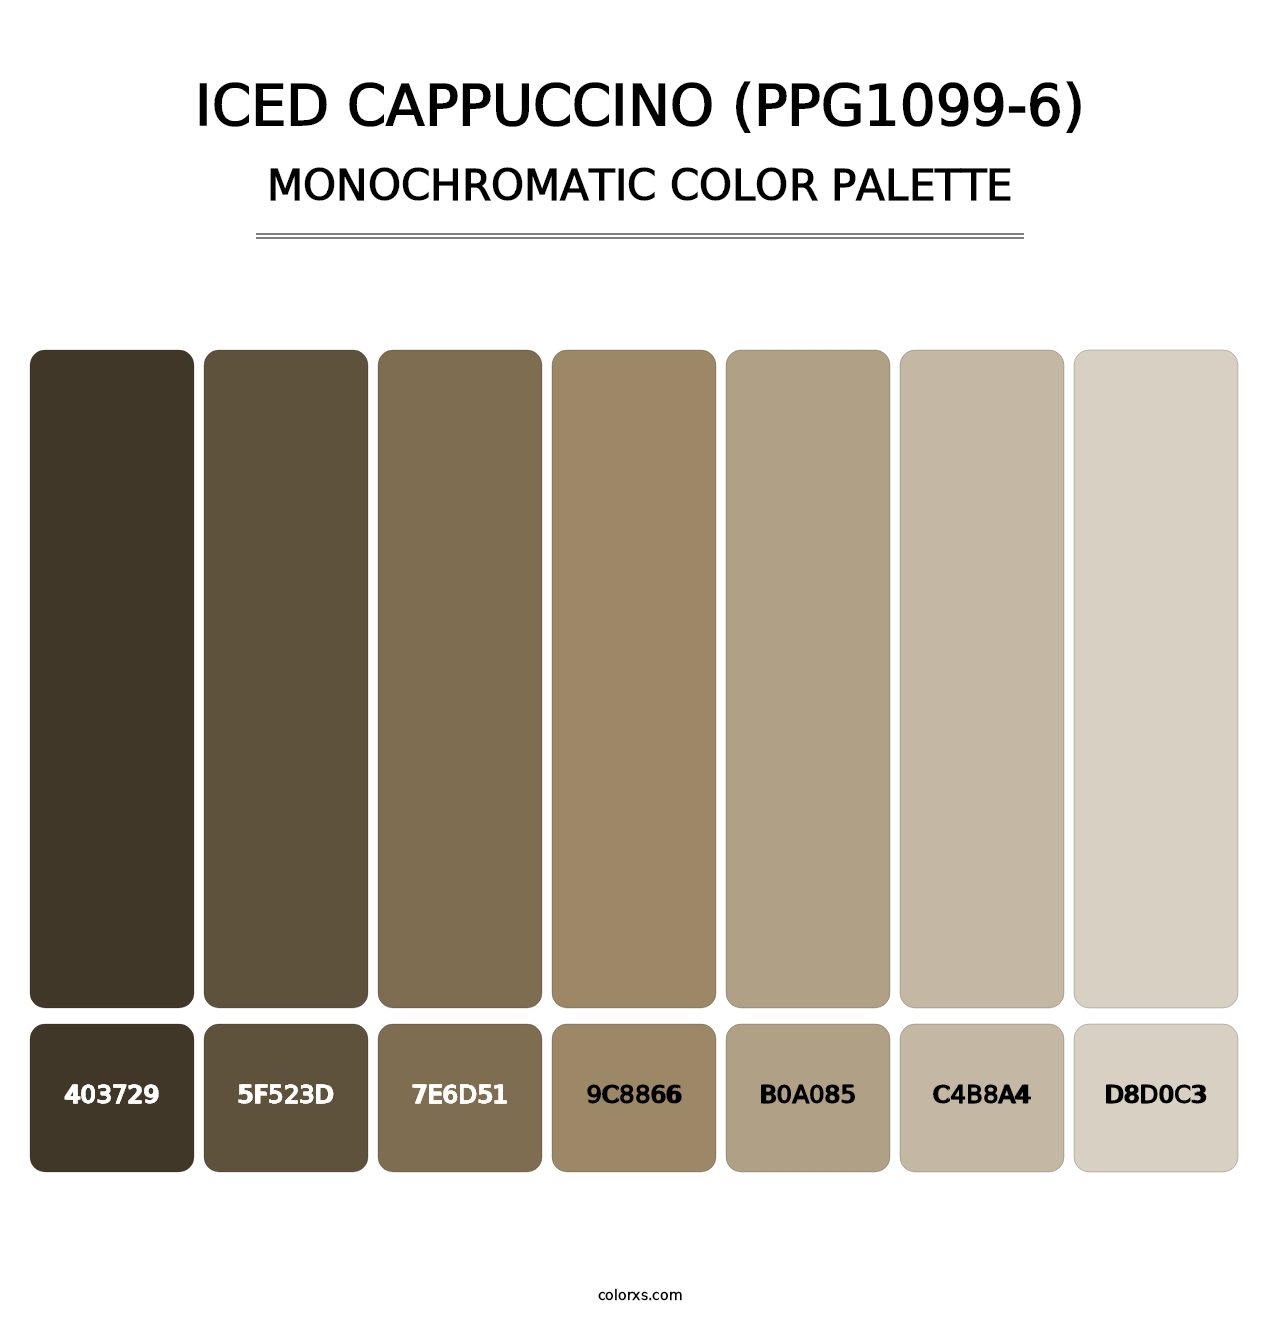 Iced Cappuccino (PPG1099-6) - Monochromatic Color Palette